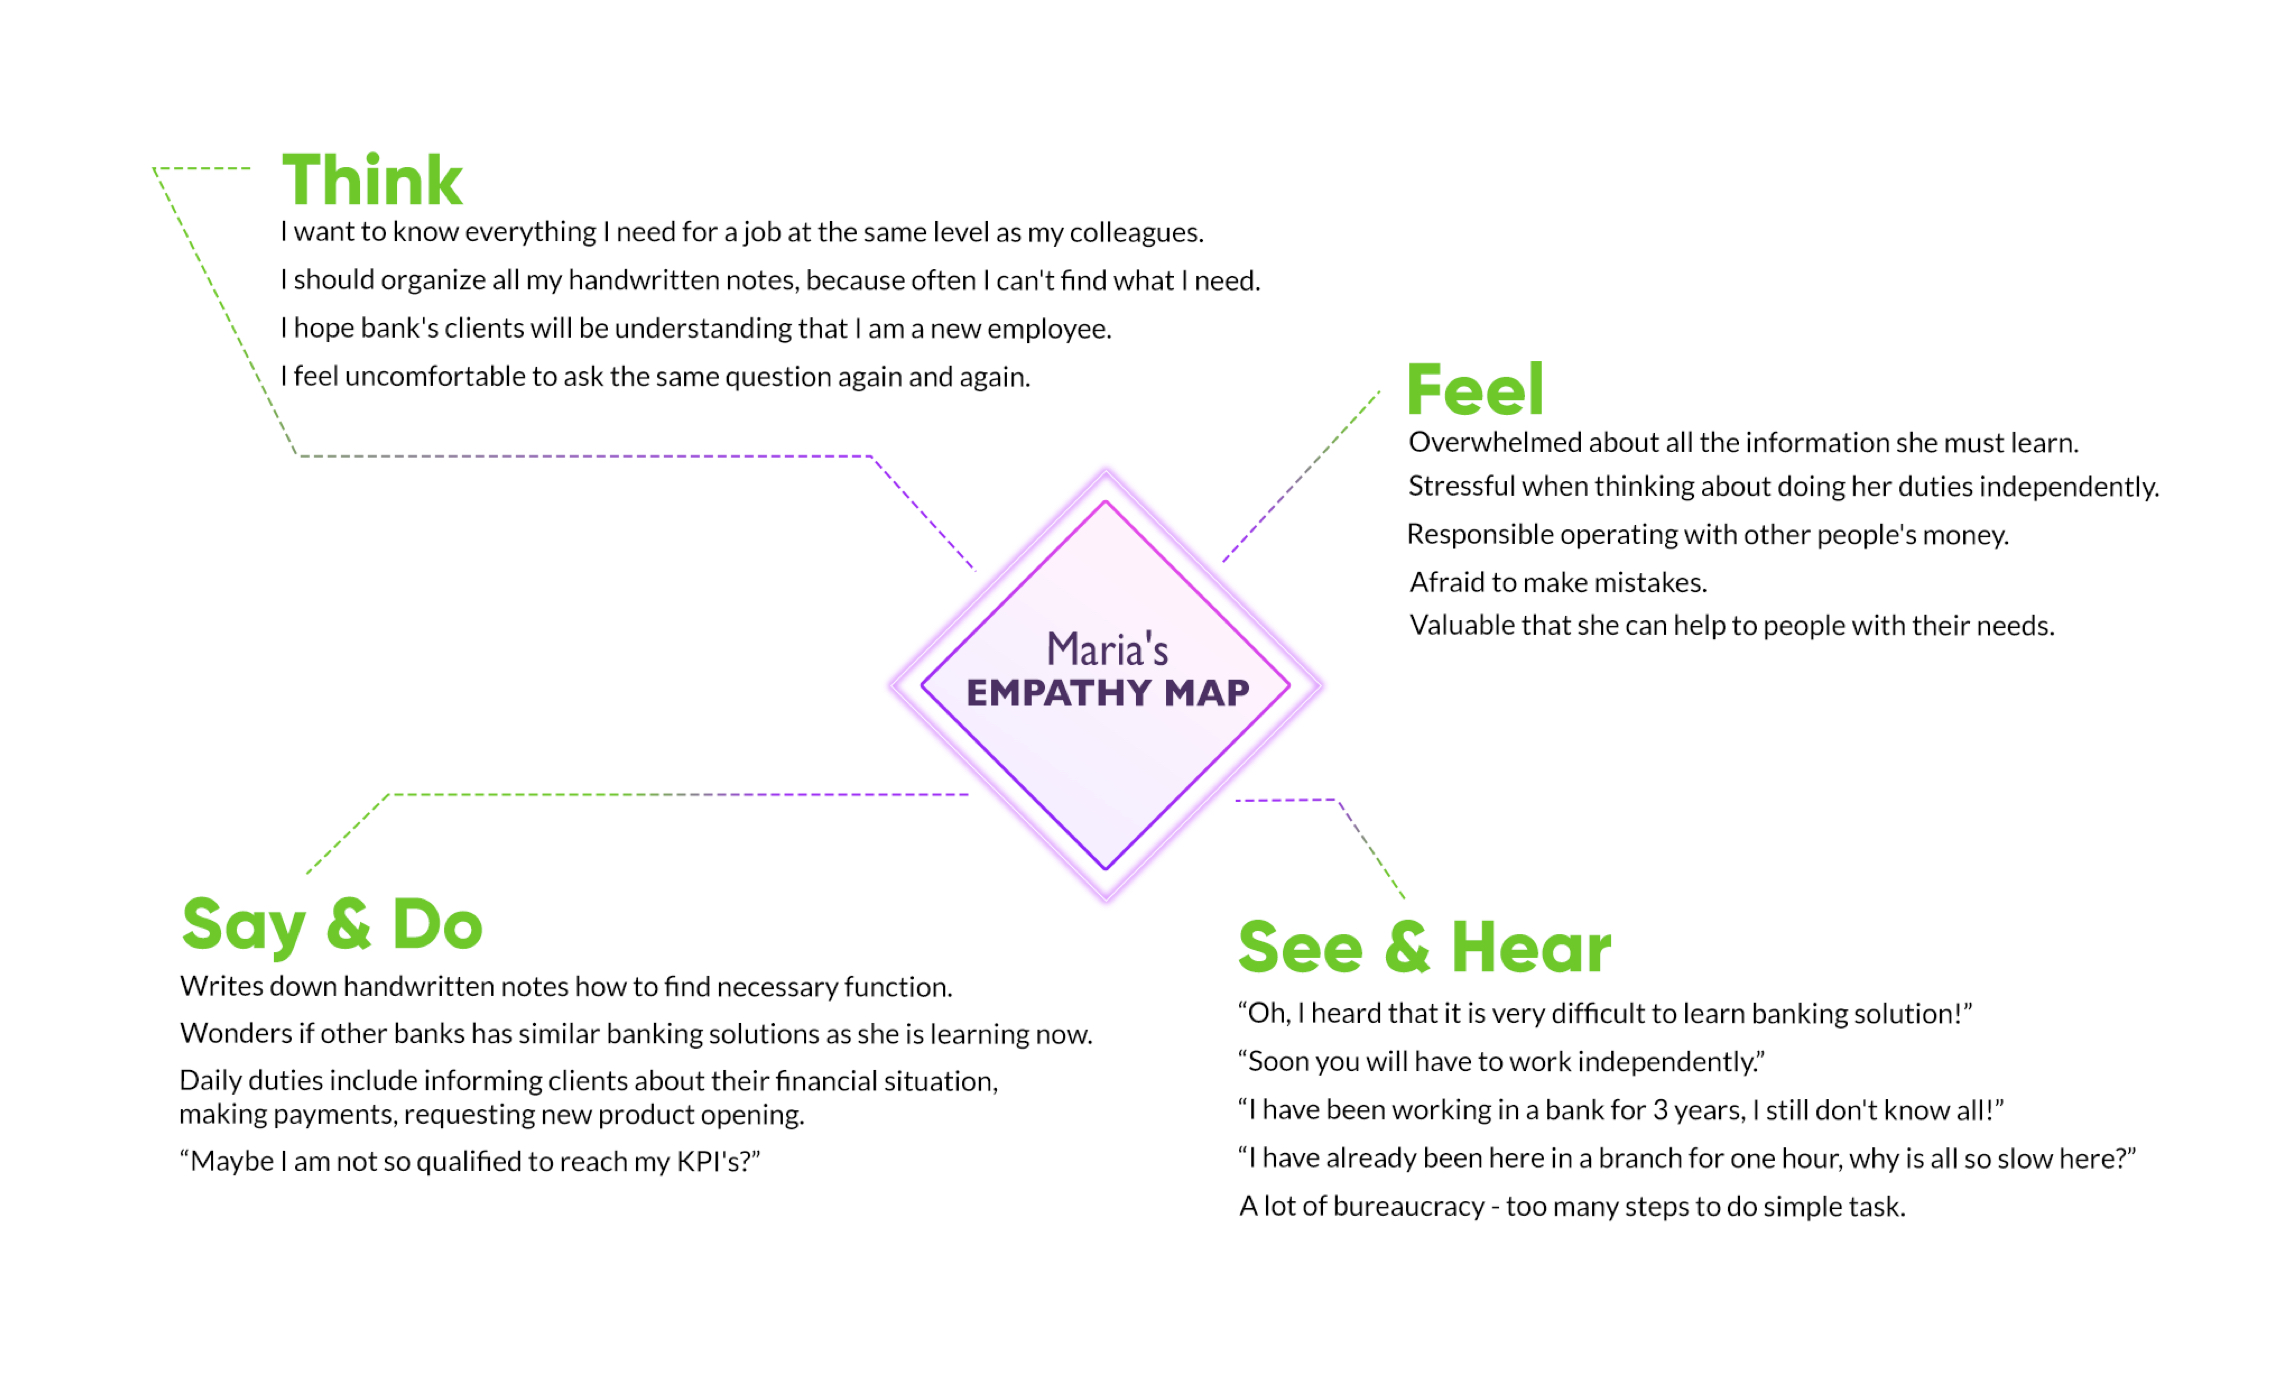 Core Banking Case Study: Digital Transformation in Financial Services - Empathy Map